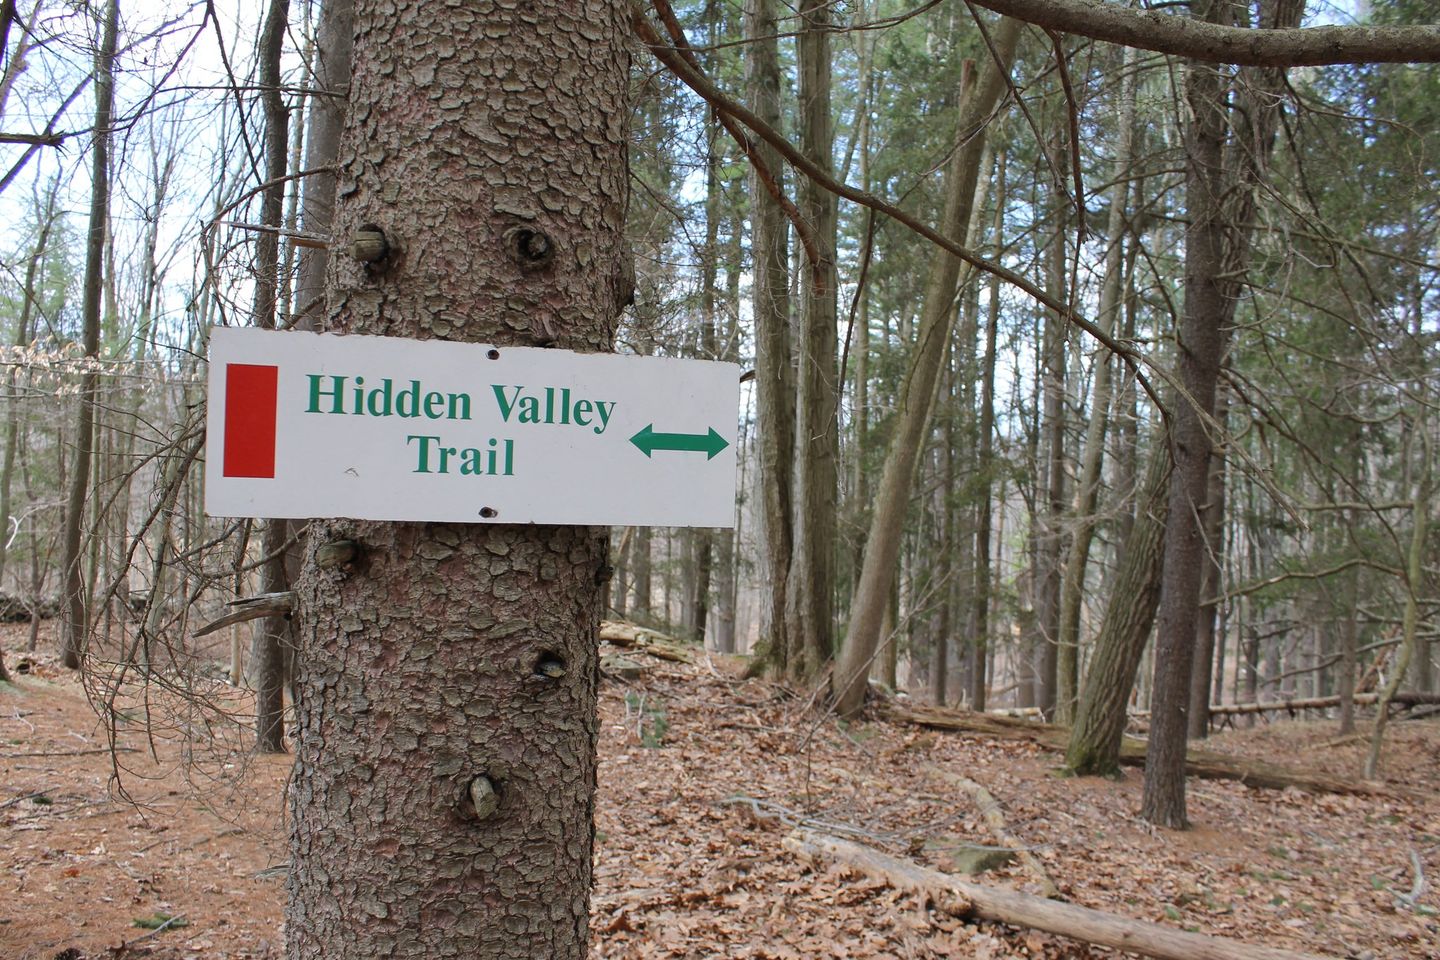 May be an image of tree, nature and text that says 'Hidden Valley Trail'